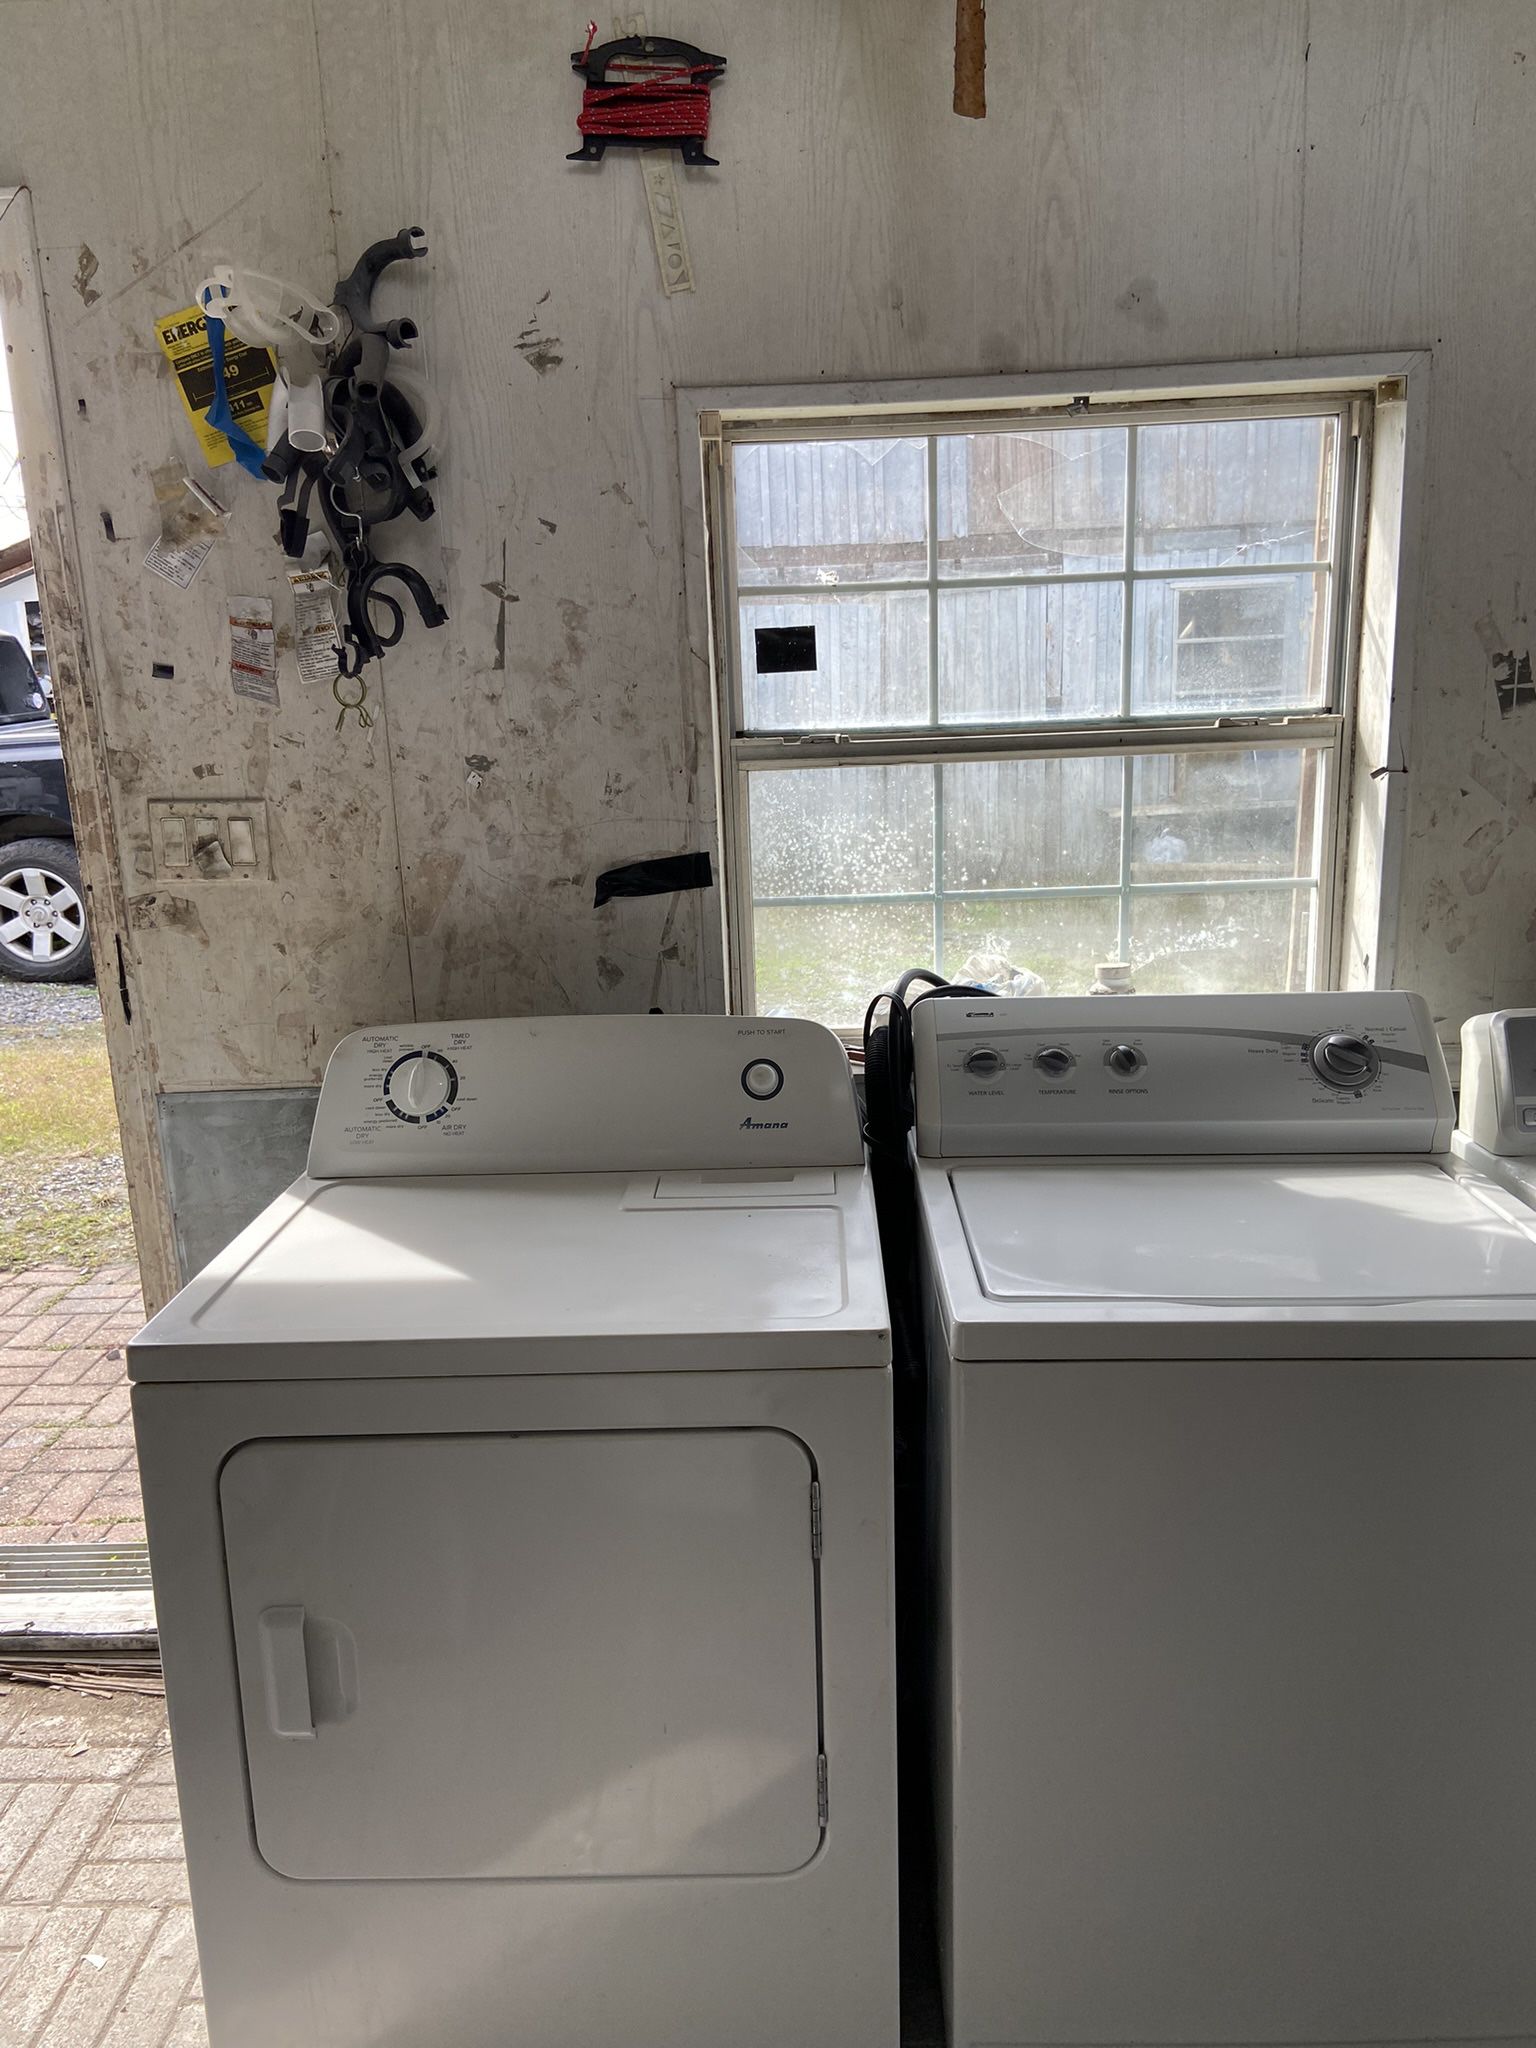 ILL  RUN THEM FOR YOU THROUGH ALL CYCLES! EXCELLANT  RUNNING  SUPER LOAD KENMORE WASHER & AMANA ELECTRIC DRYER SET. THEY BOTH RUN LIKE BRAND NEW!. ALL